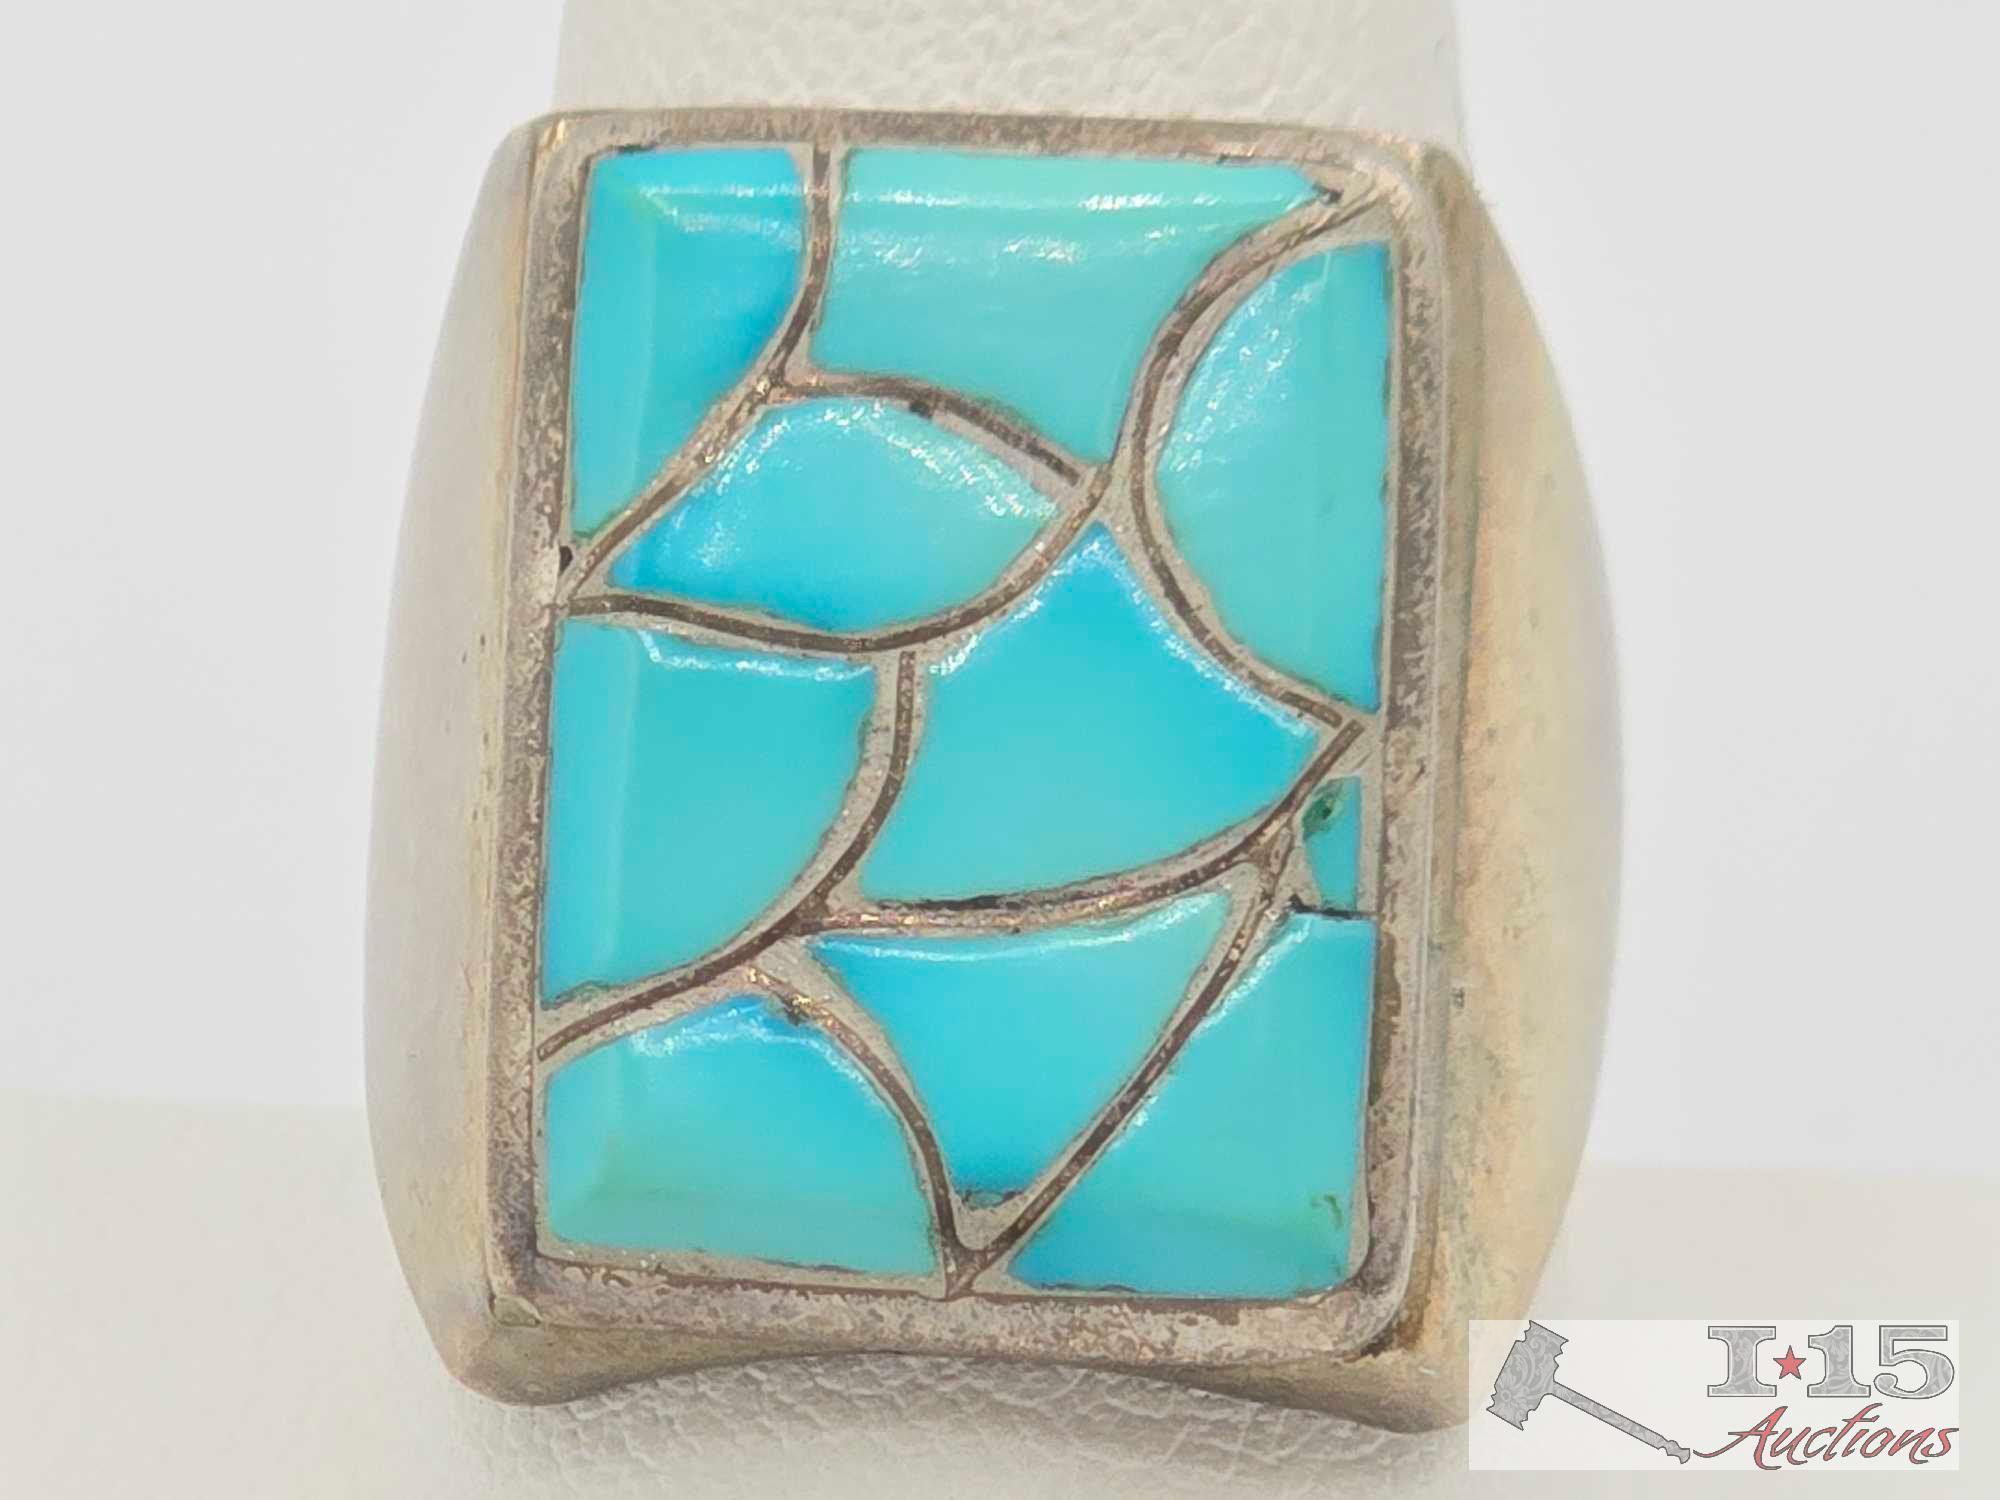 Sterling Silver Cuff Bracelets, Pendants, Buttons and Ring with Turquoise, 143.58g